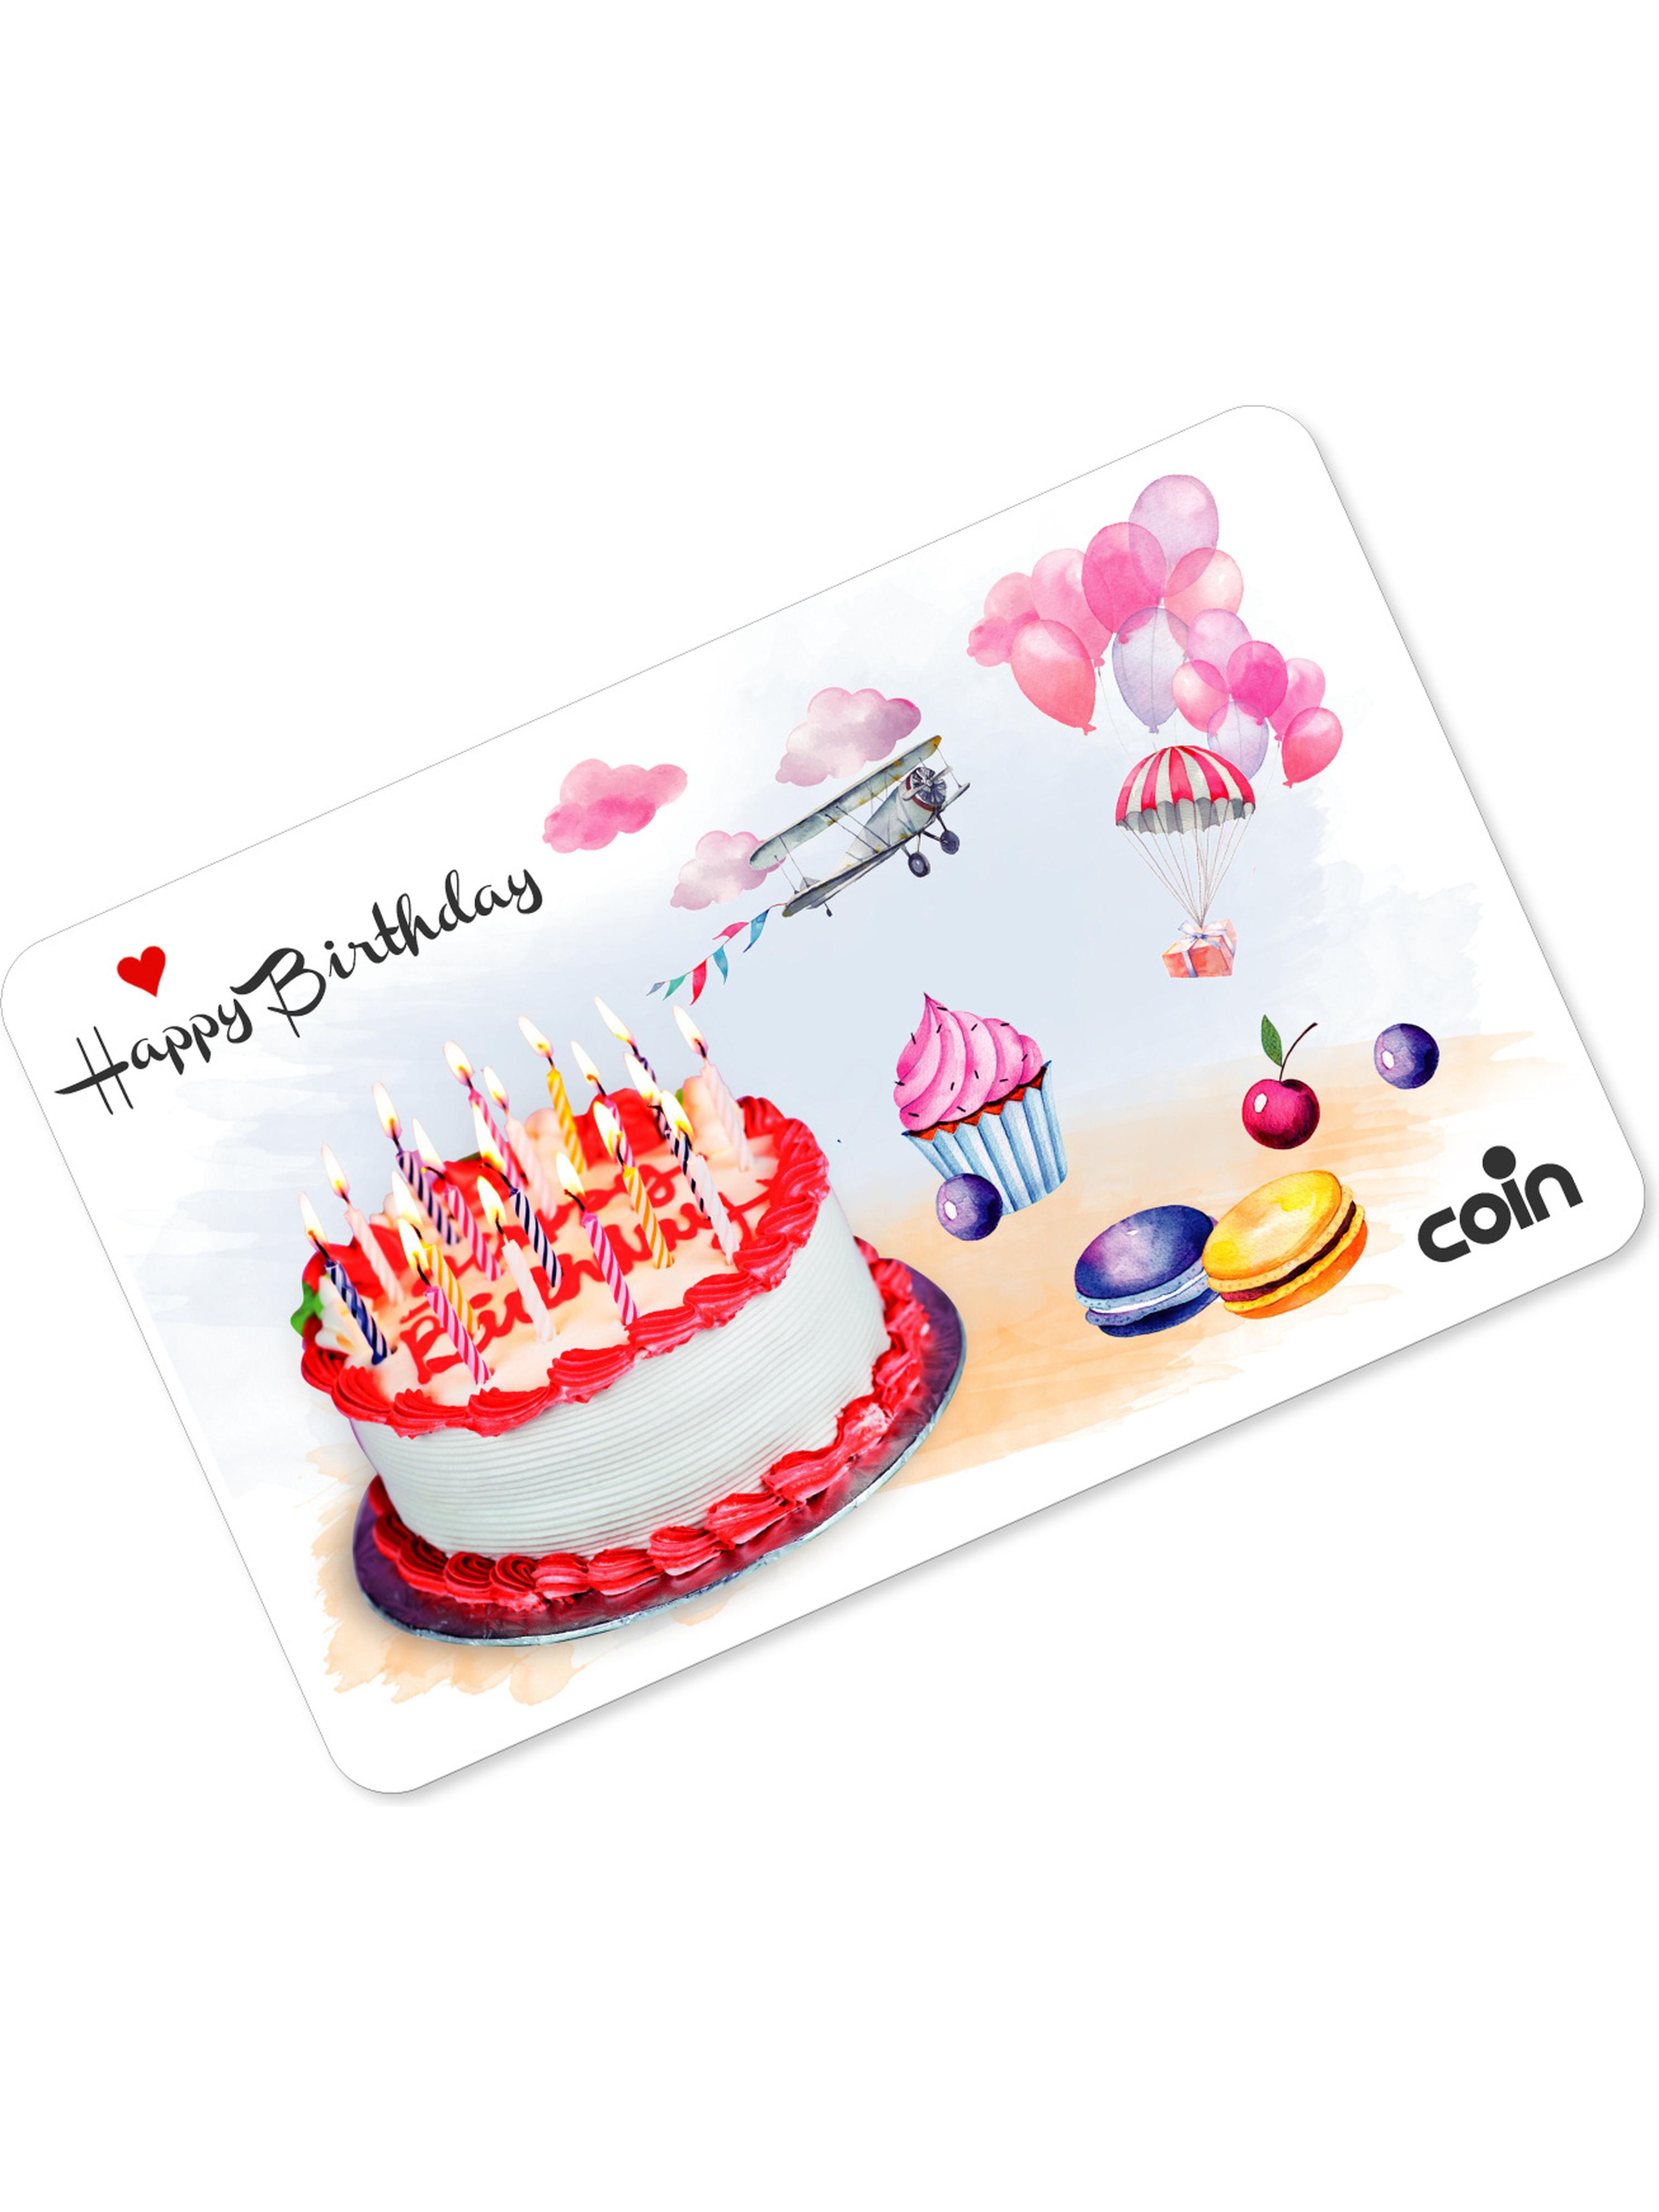 Giftcard Buon Compleanno